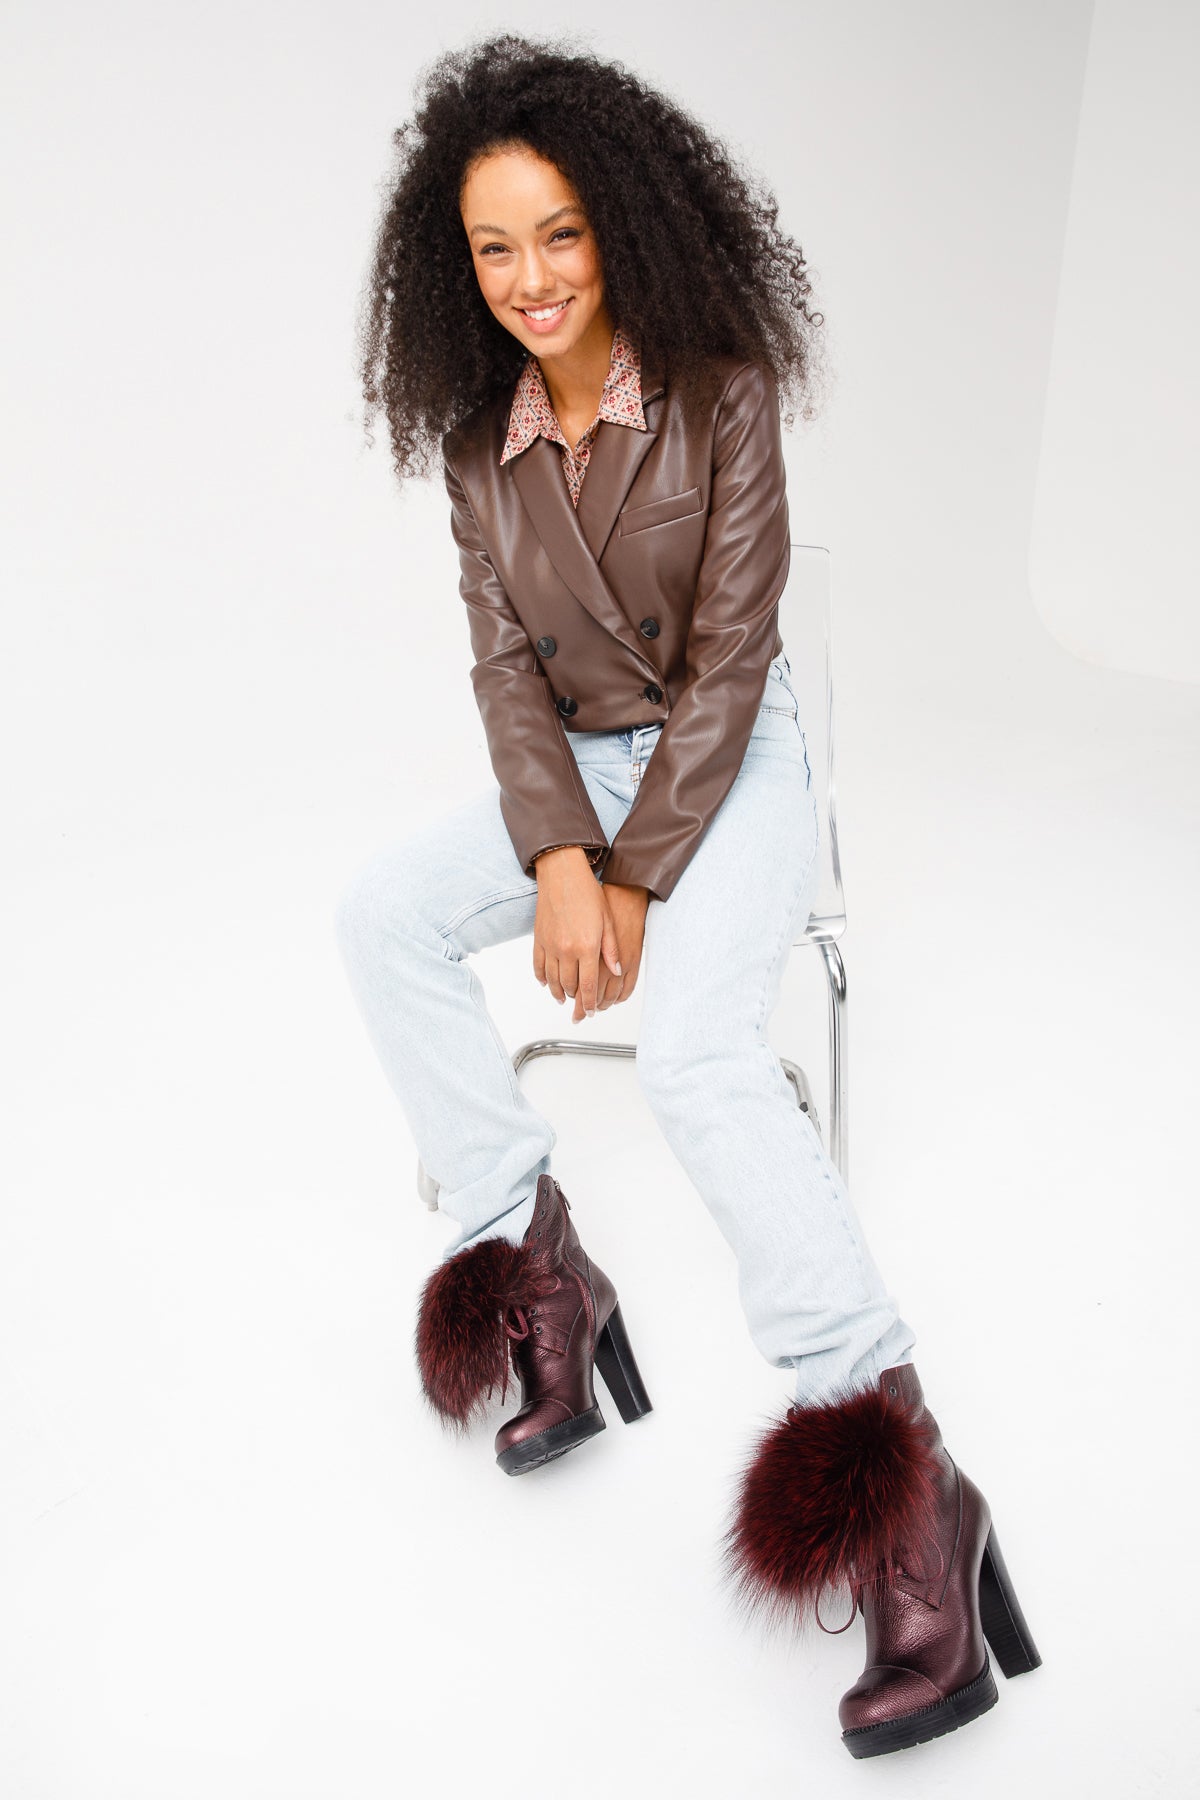 The Melo Burgundy Leather Natural Mid Calf Platform Heel Women Boot